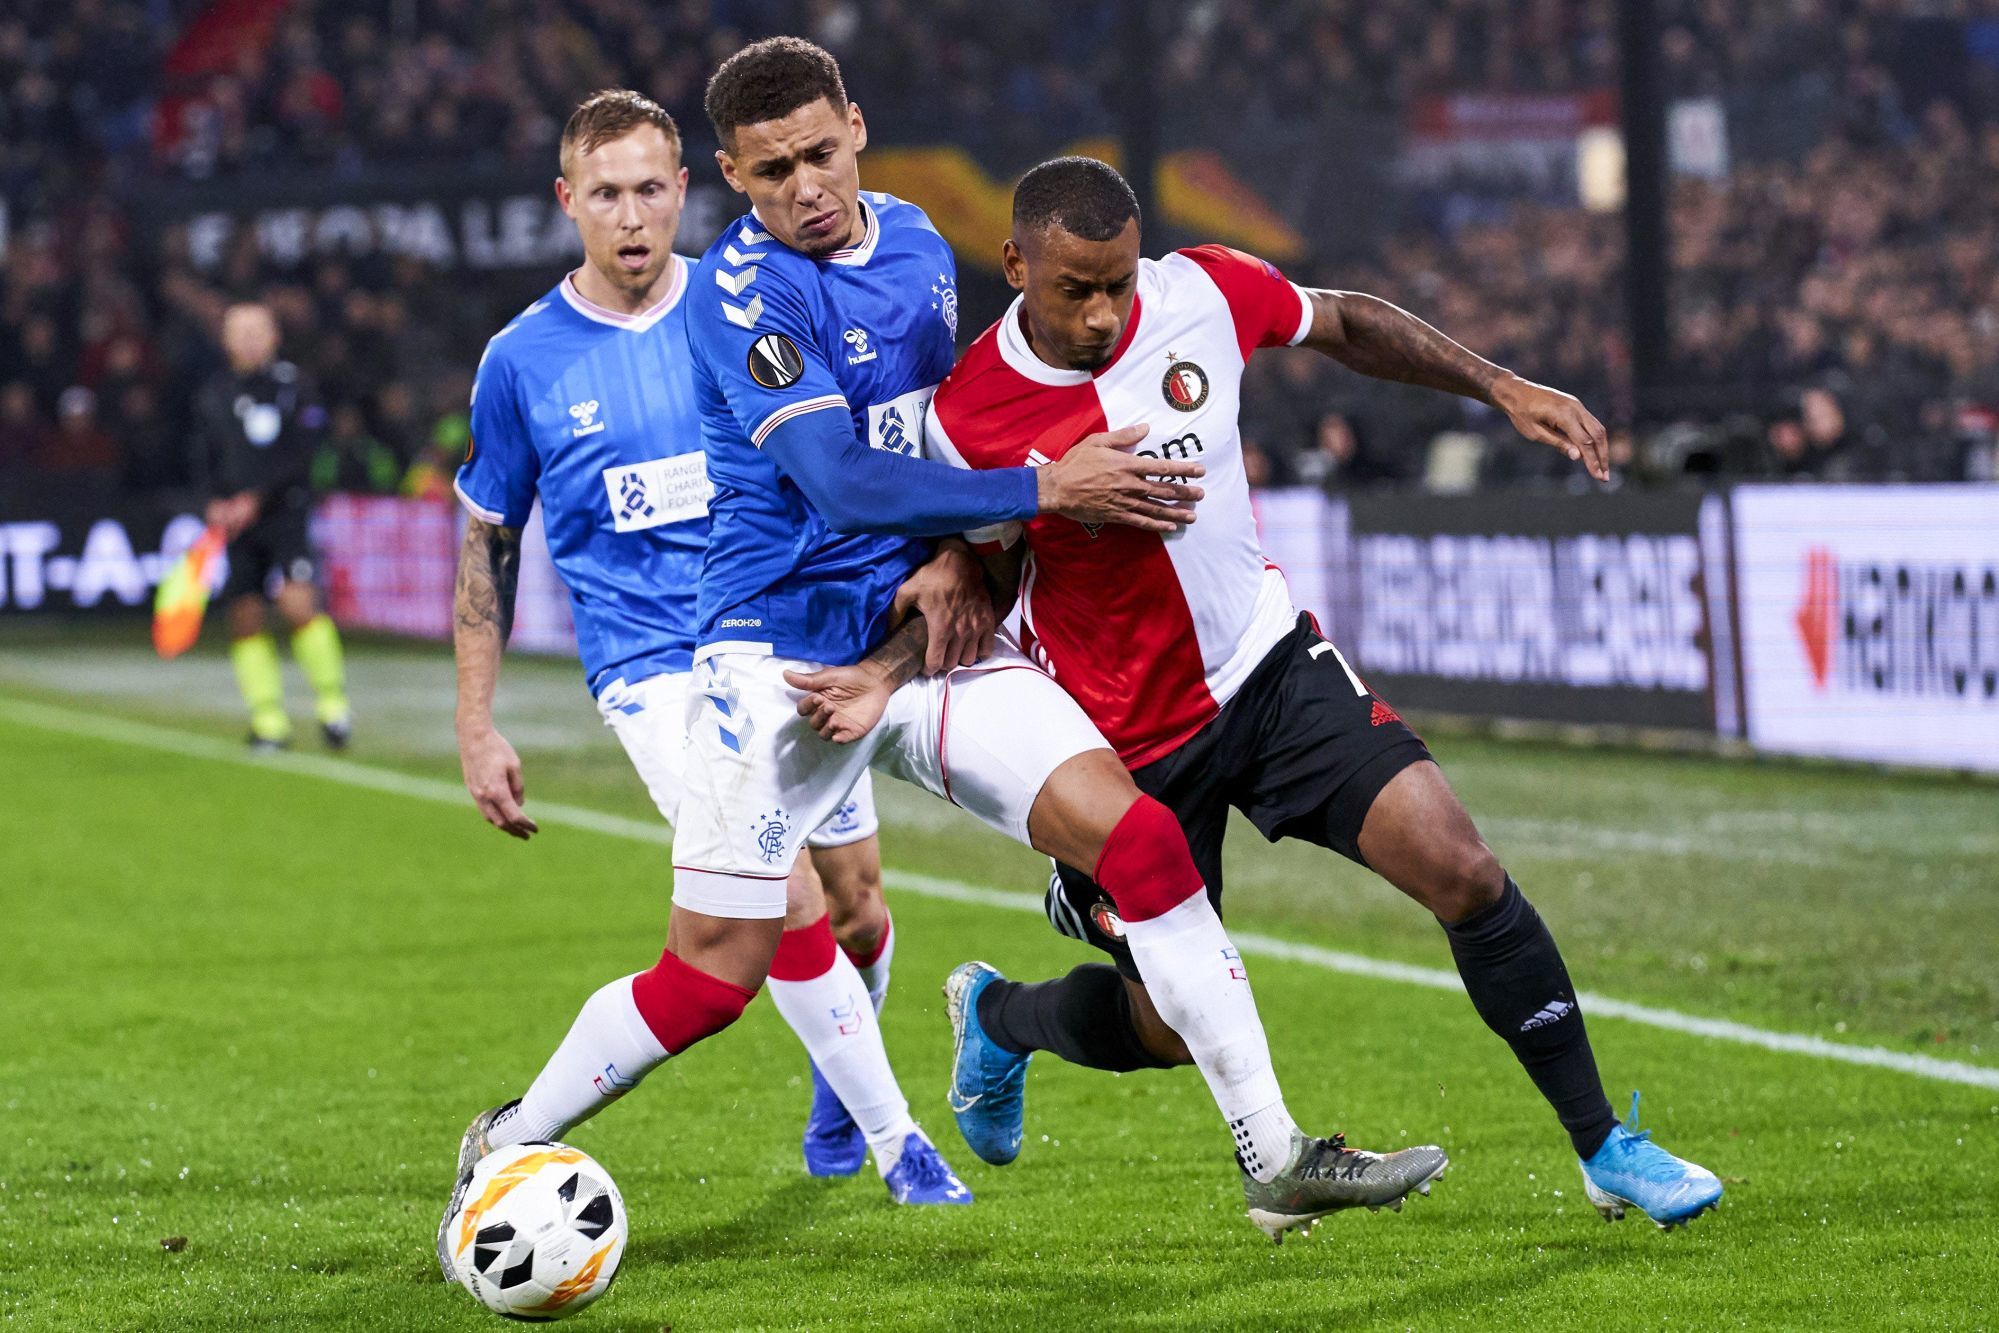 James Tavernier of Rangers FC, Luciano Narsingh of Feyenoord during the UEFA Europa League group G match between Feyenoord Rotterdam and Rangers FC at De Kuip on November 28, 2019 in Rotterdam, The Netherlands 

Photo by Icon Sport - De Kuip - Rotterdam (Pays Bas)